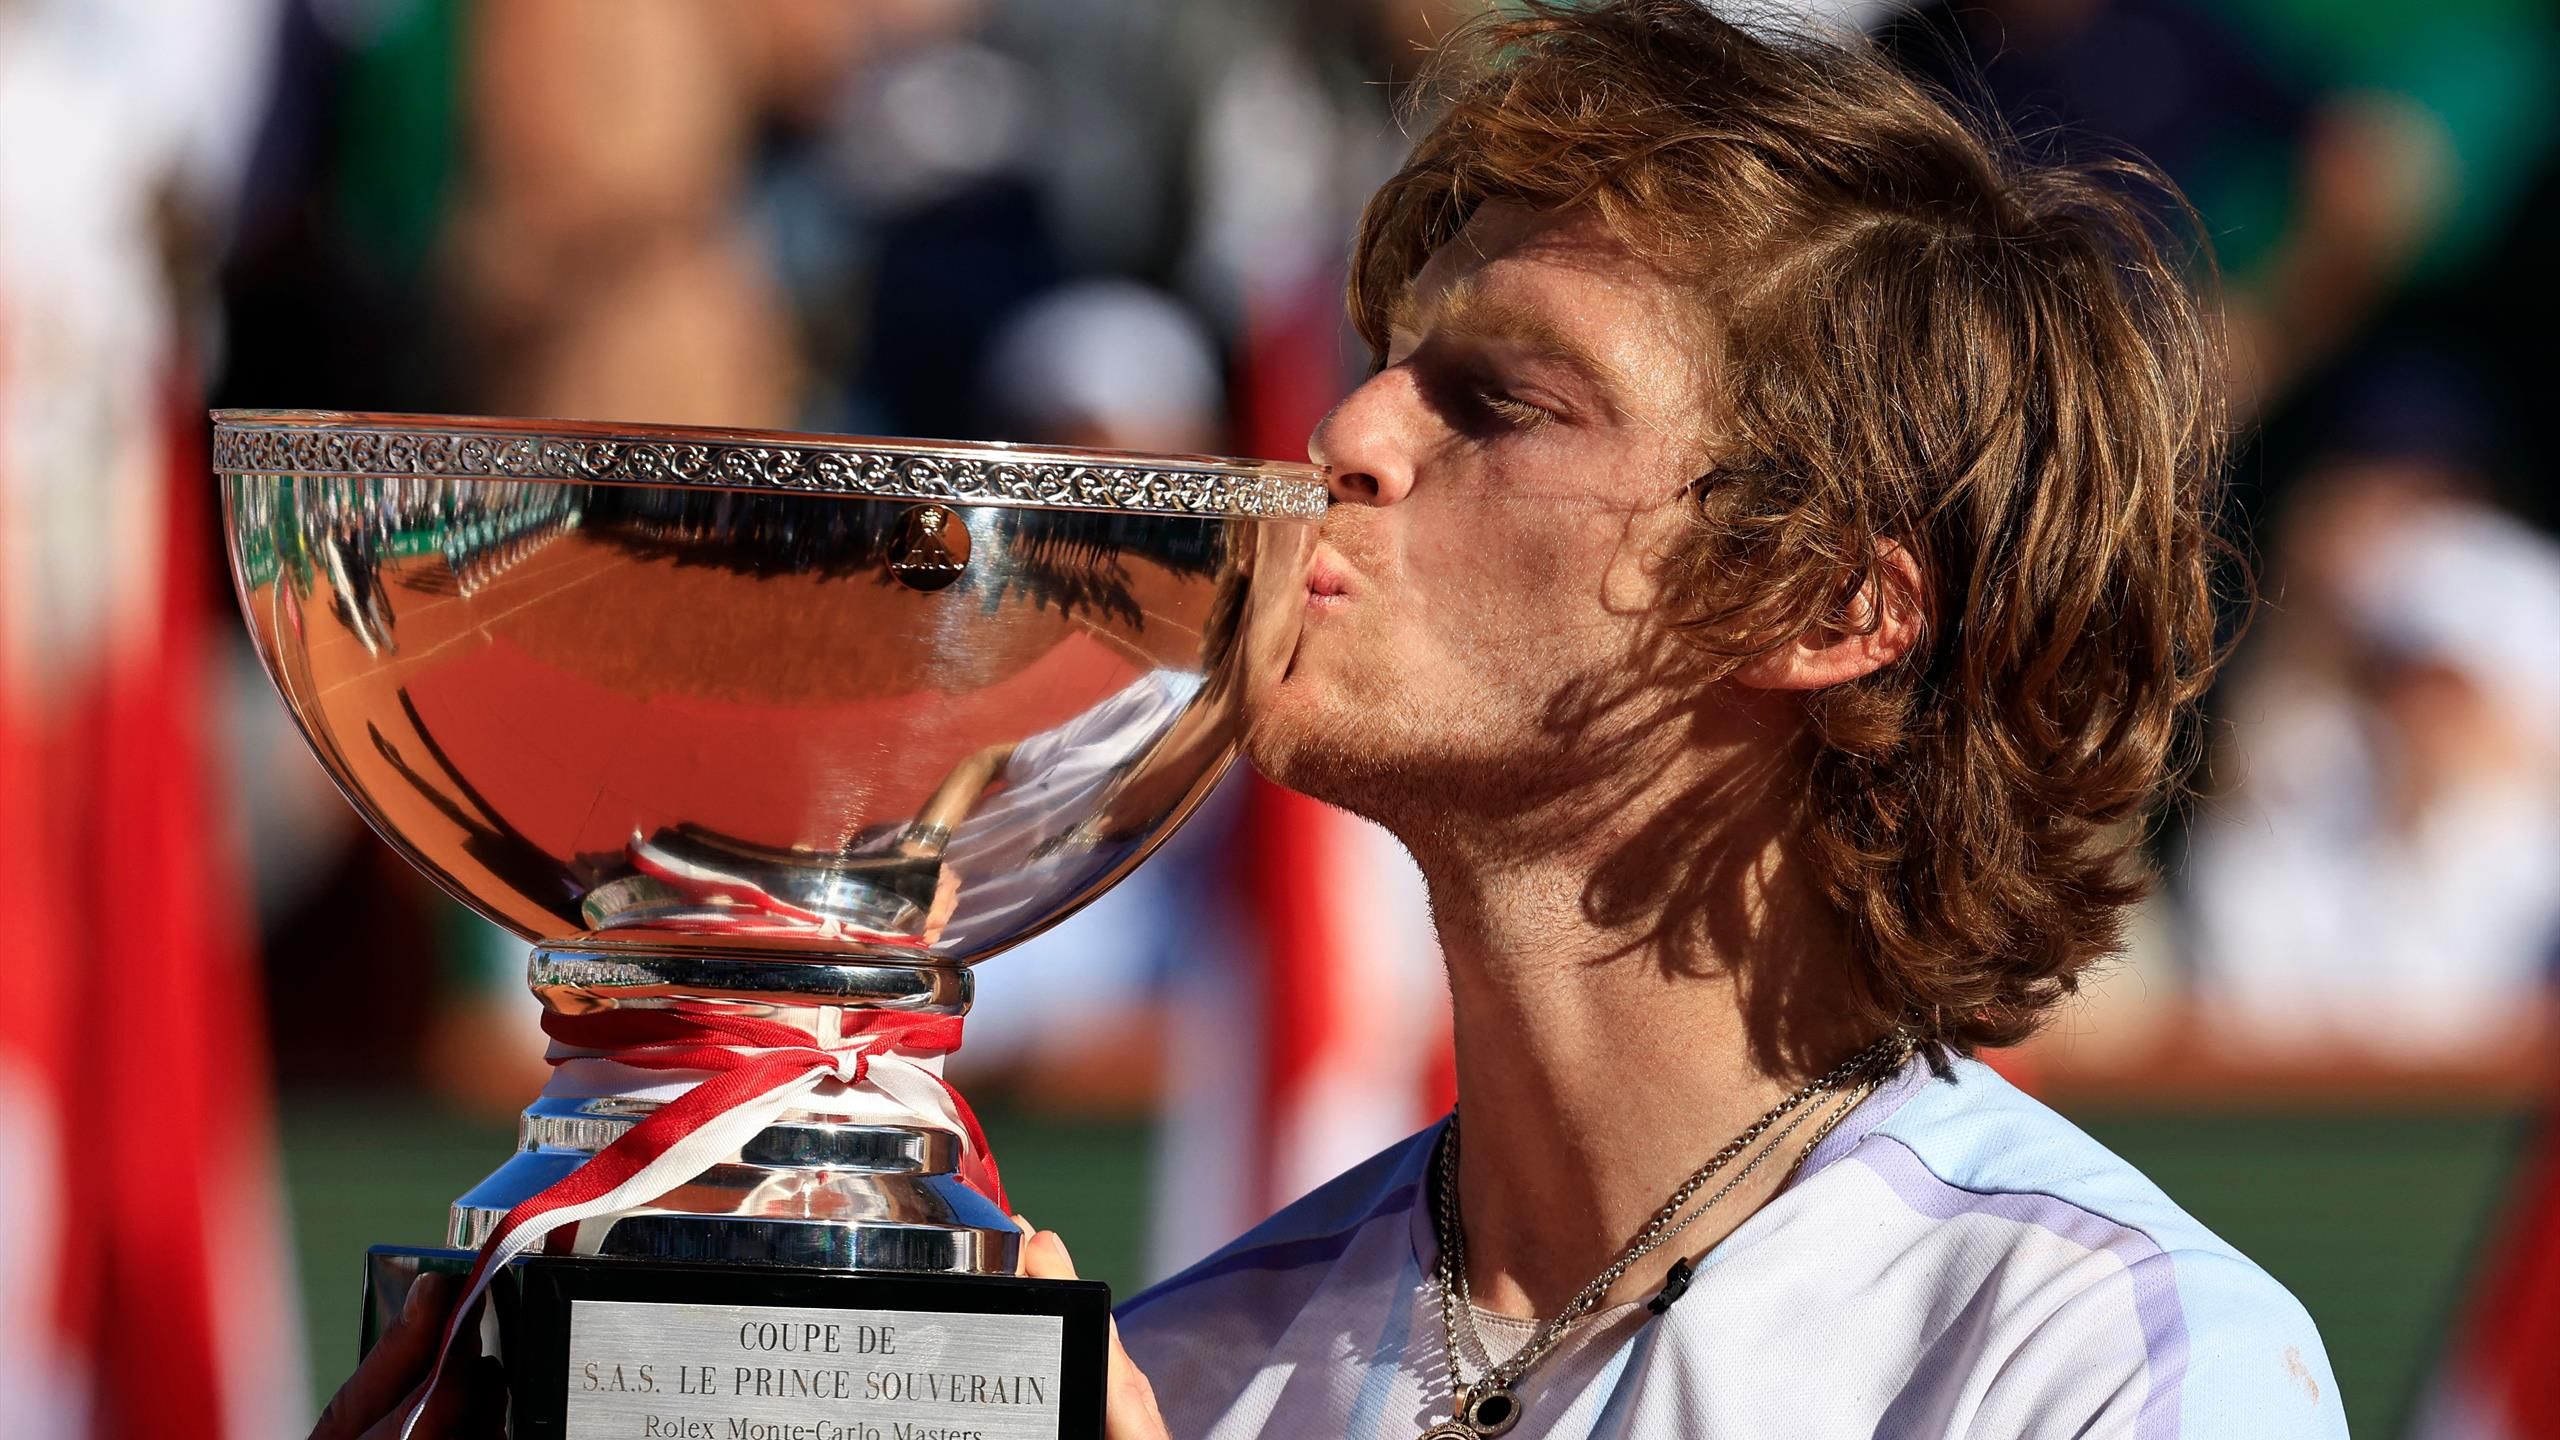 Monte Carlo Masters Andrey Rublev wins maiden ATP 1000 title after thrilling comeback against Holger Rune